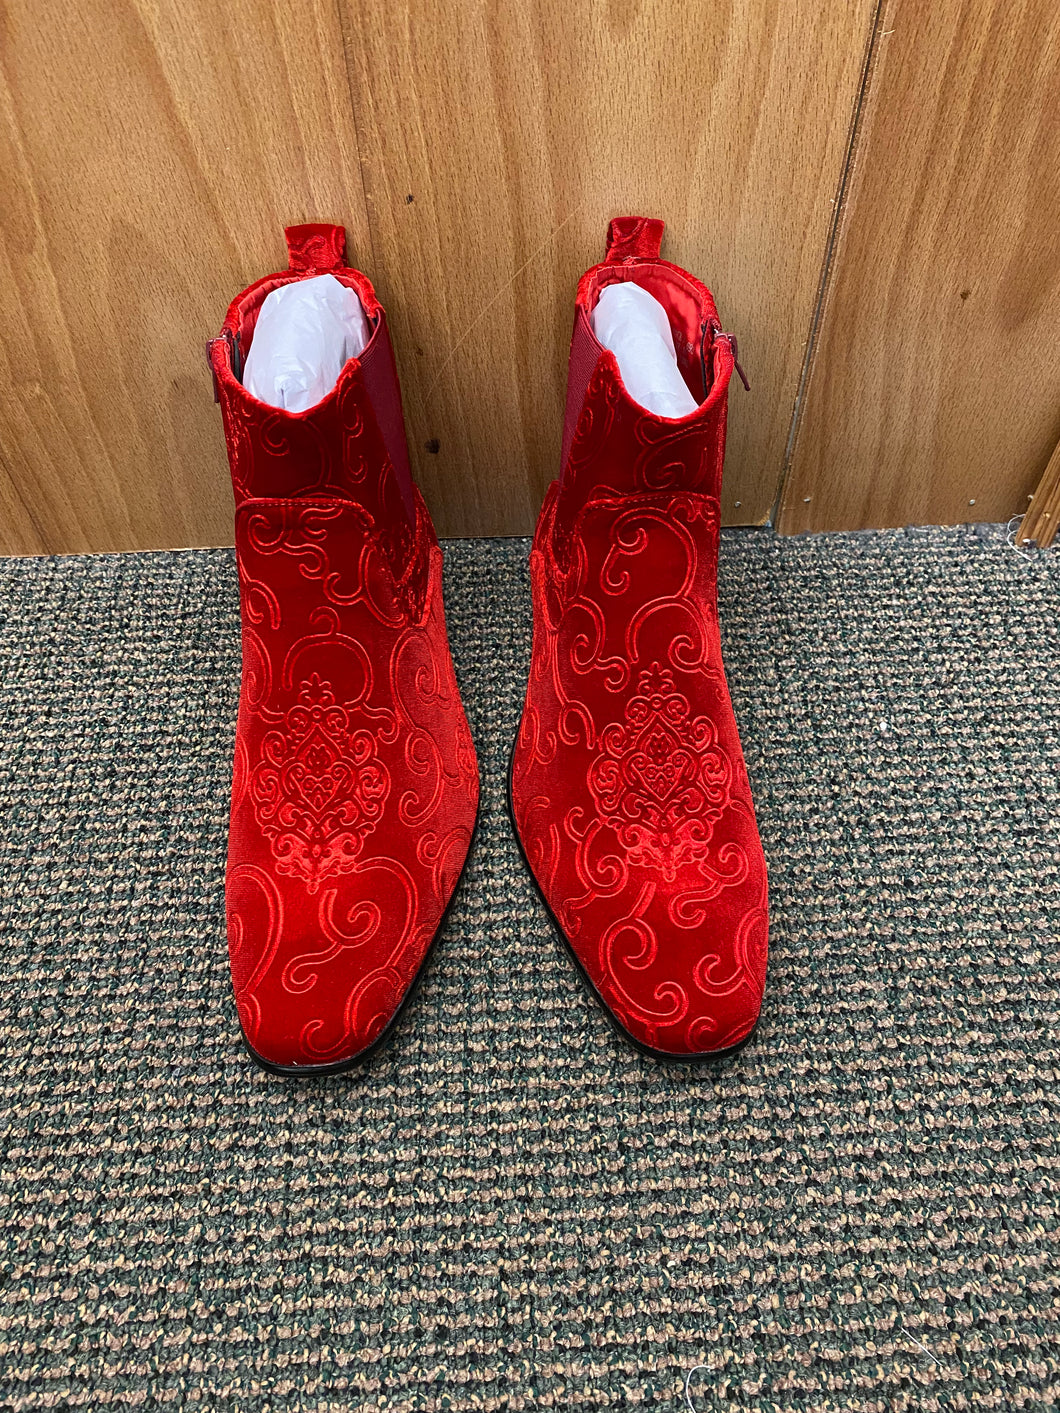 red bottom boots